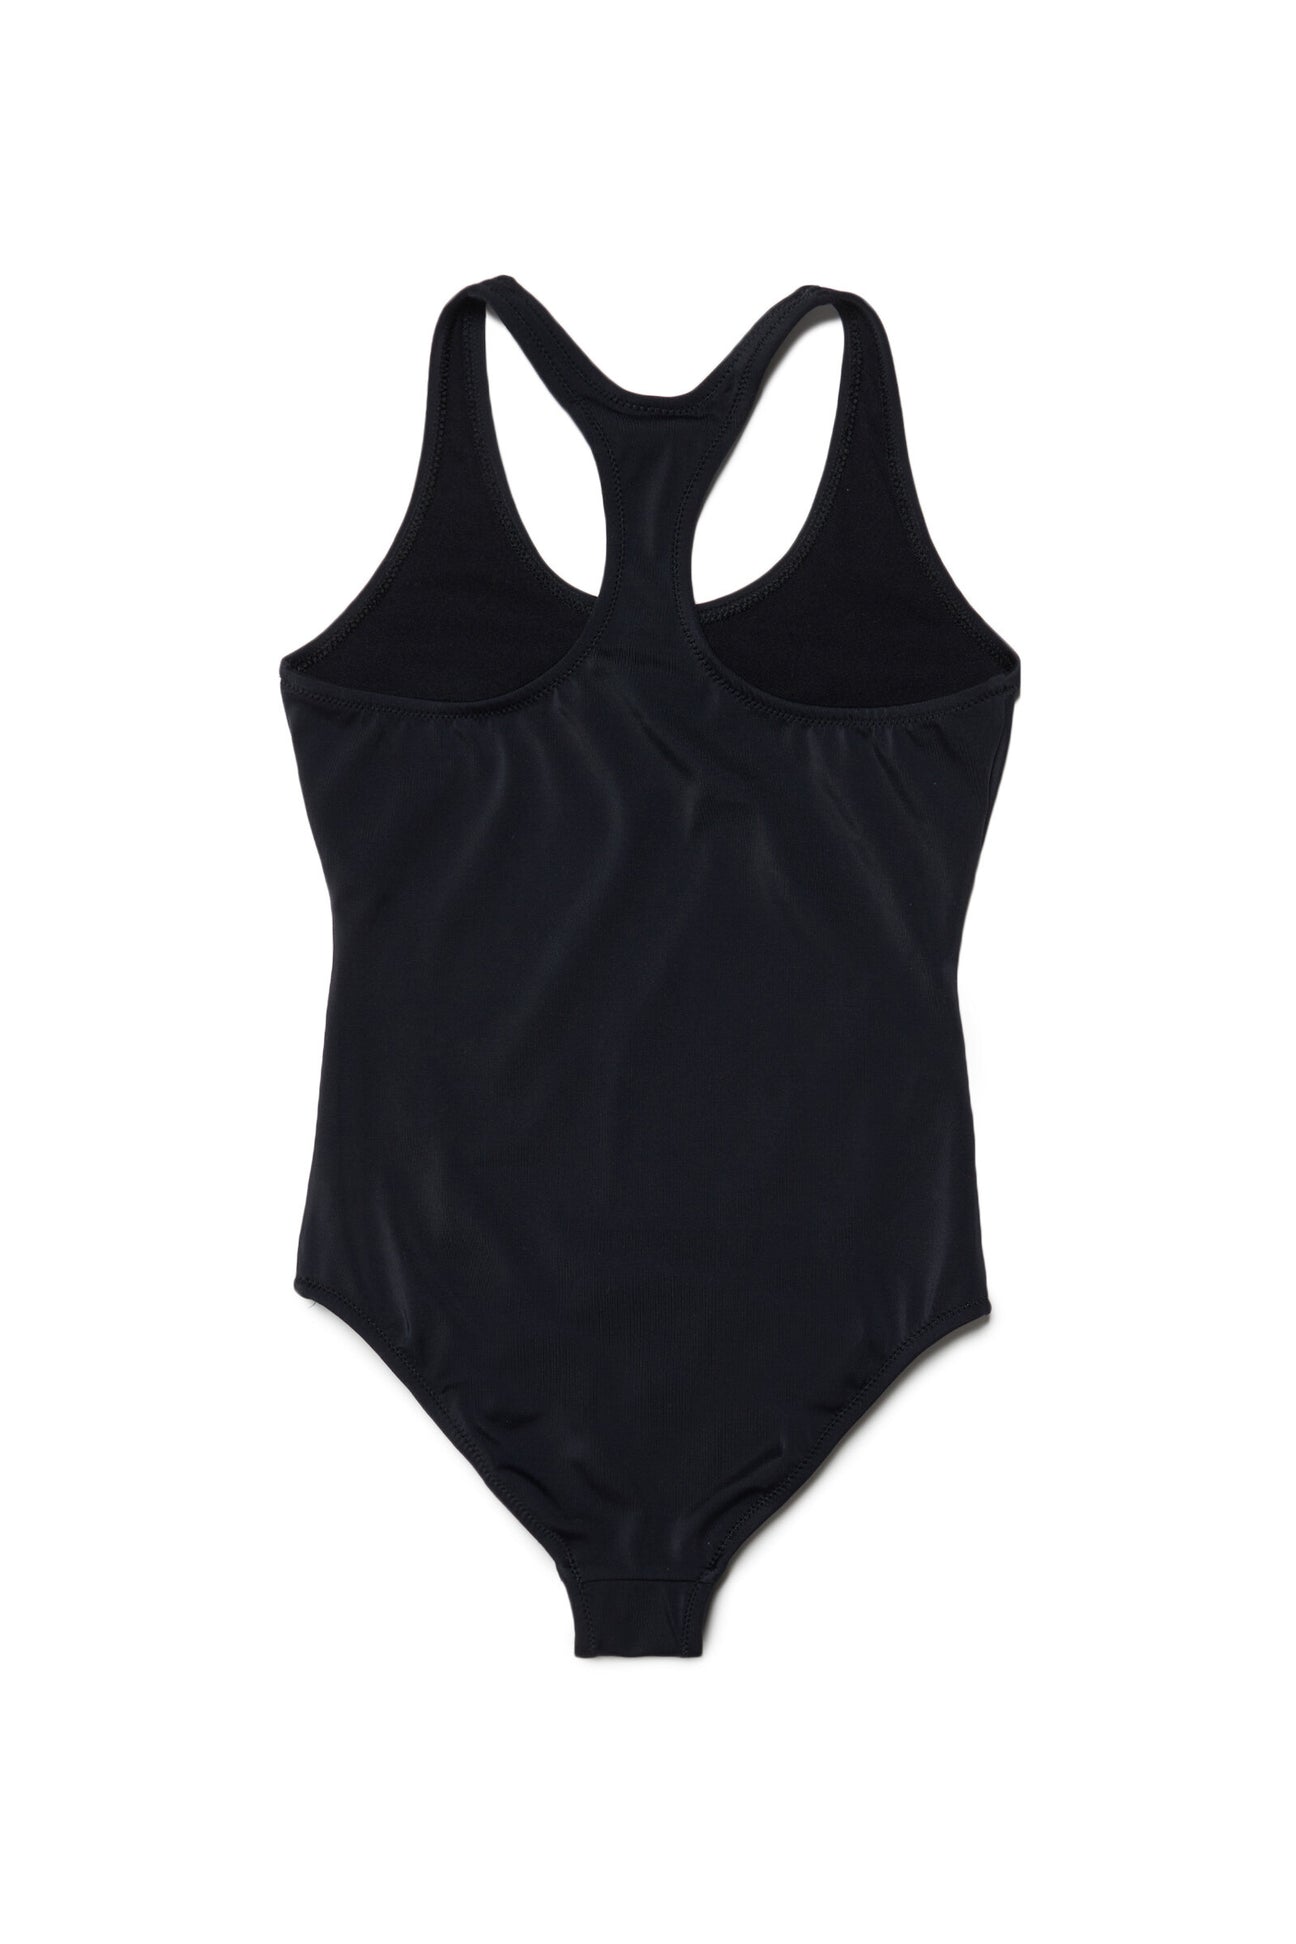 Black lycra one-piece swimming costume with logo Black lycra one-piece swimming costume with logo